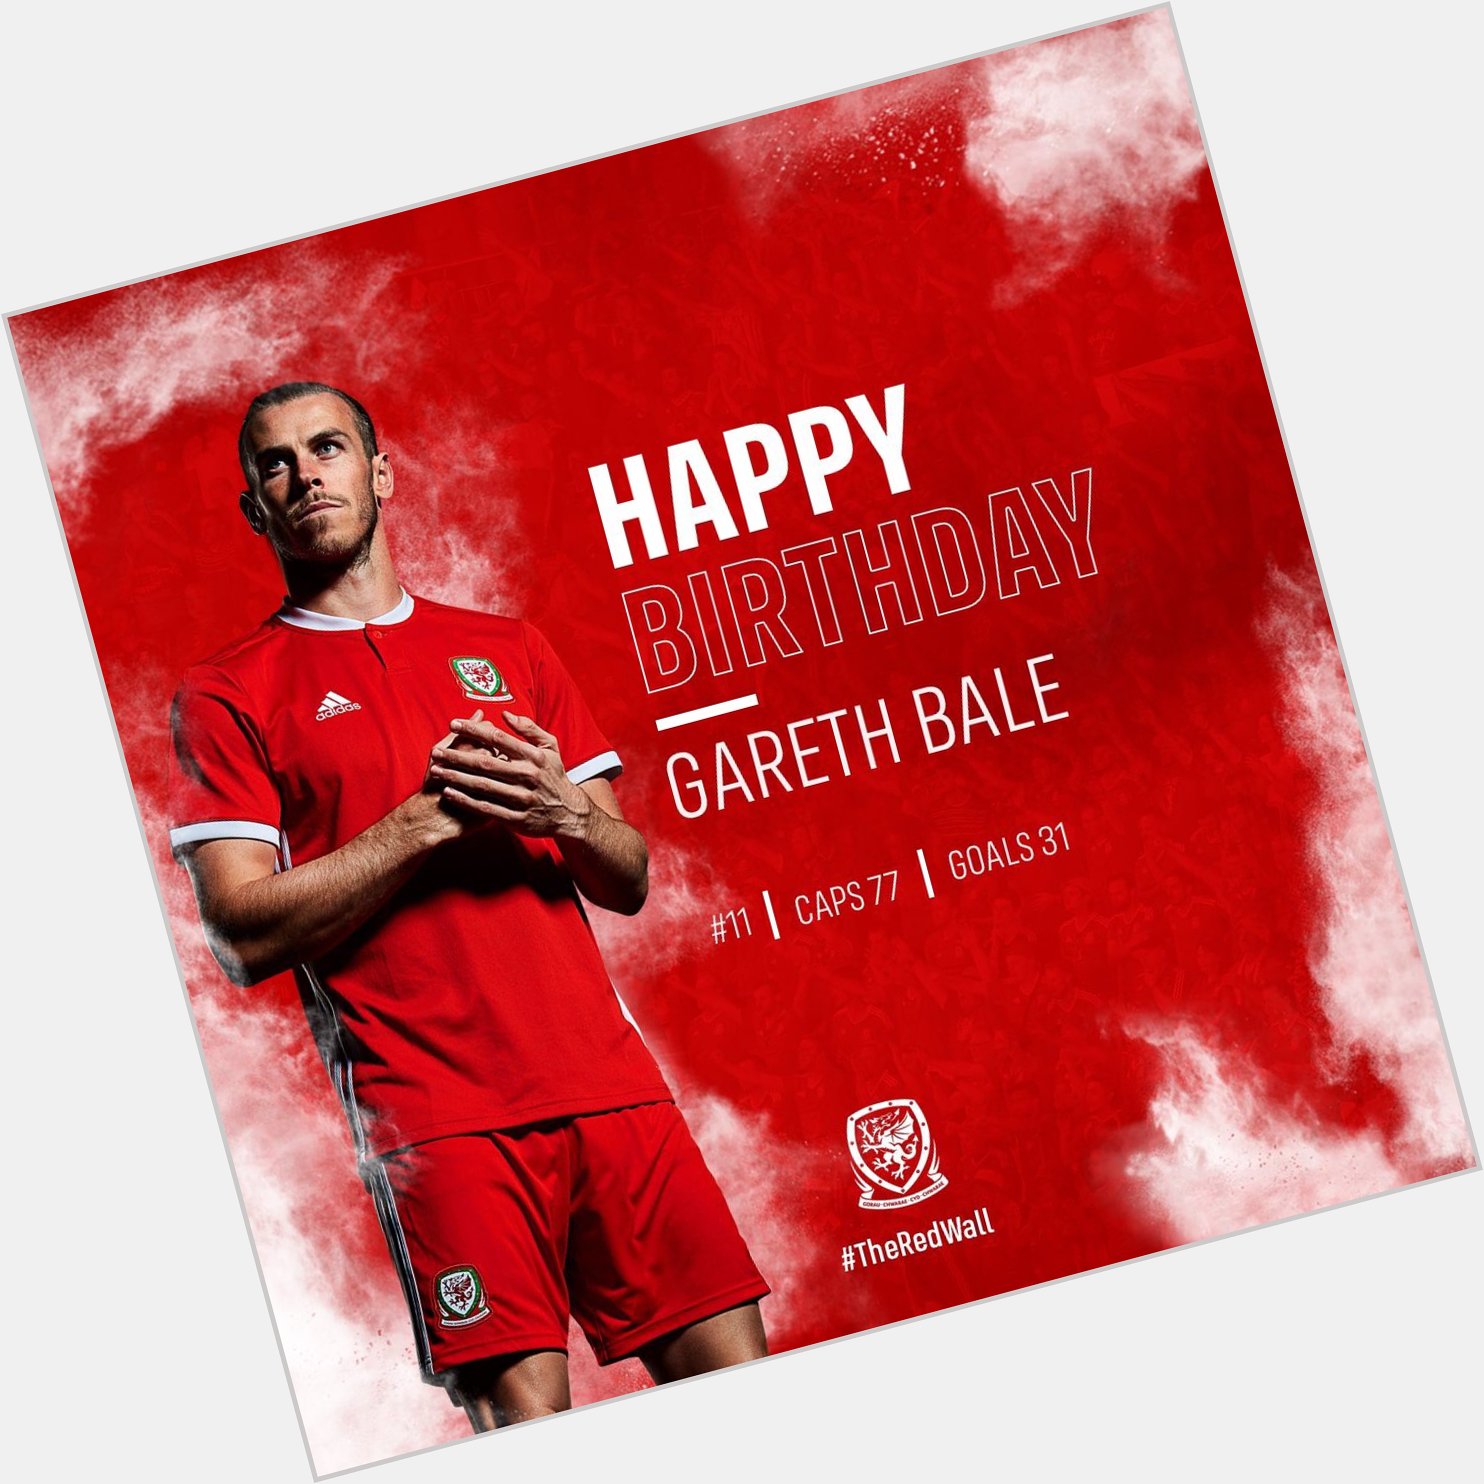 Penblwydd Hapus Gareth Bale! Happy Birthday to the man who puts the Bale in unBaleevable        